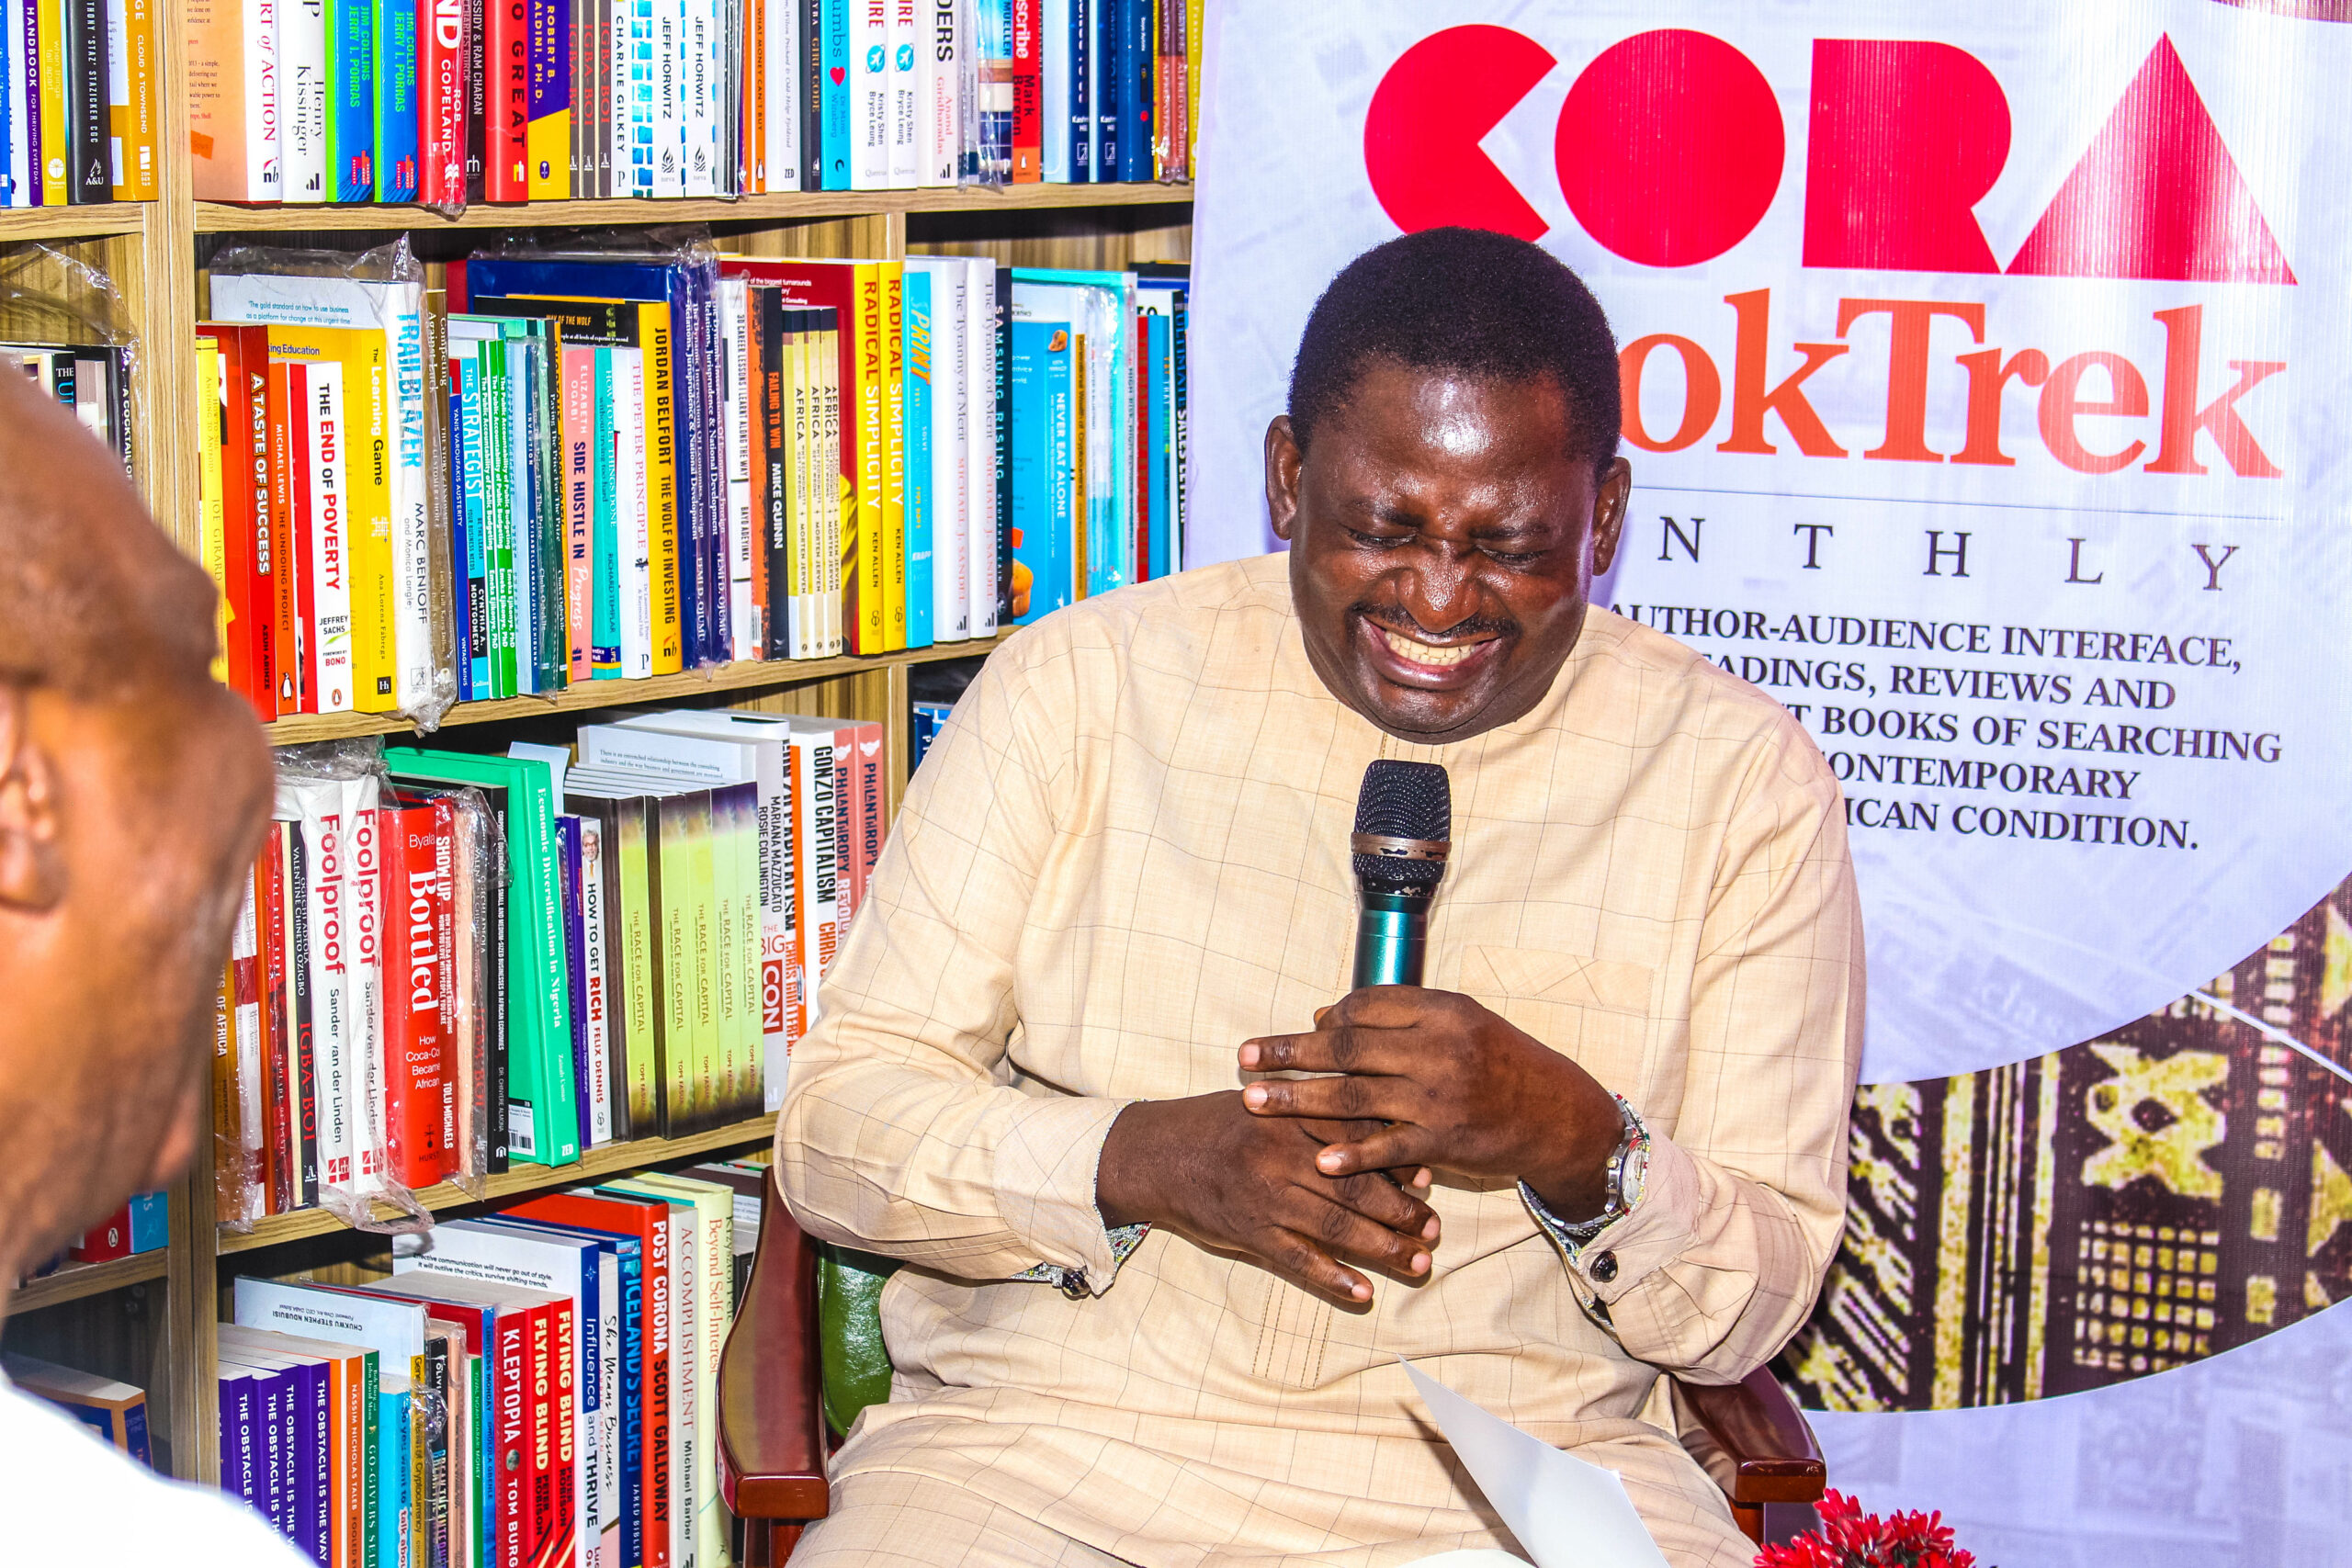 Femi Adesina discusses his experience as presidential spokesperson and his book about former President Muhammadu Buhari at CORA forum